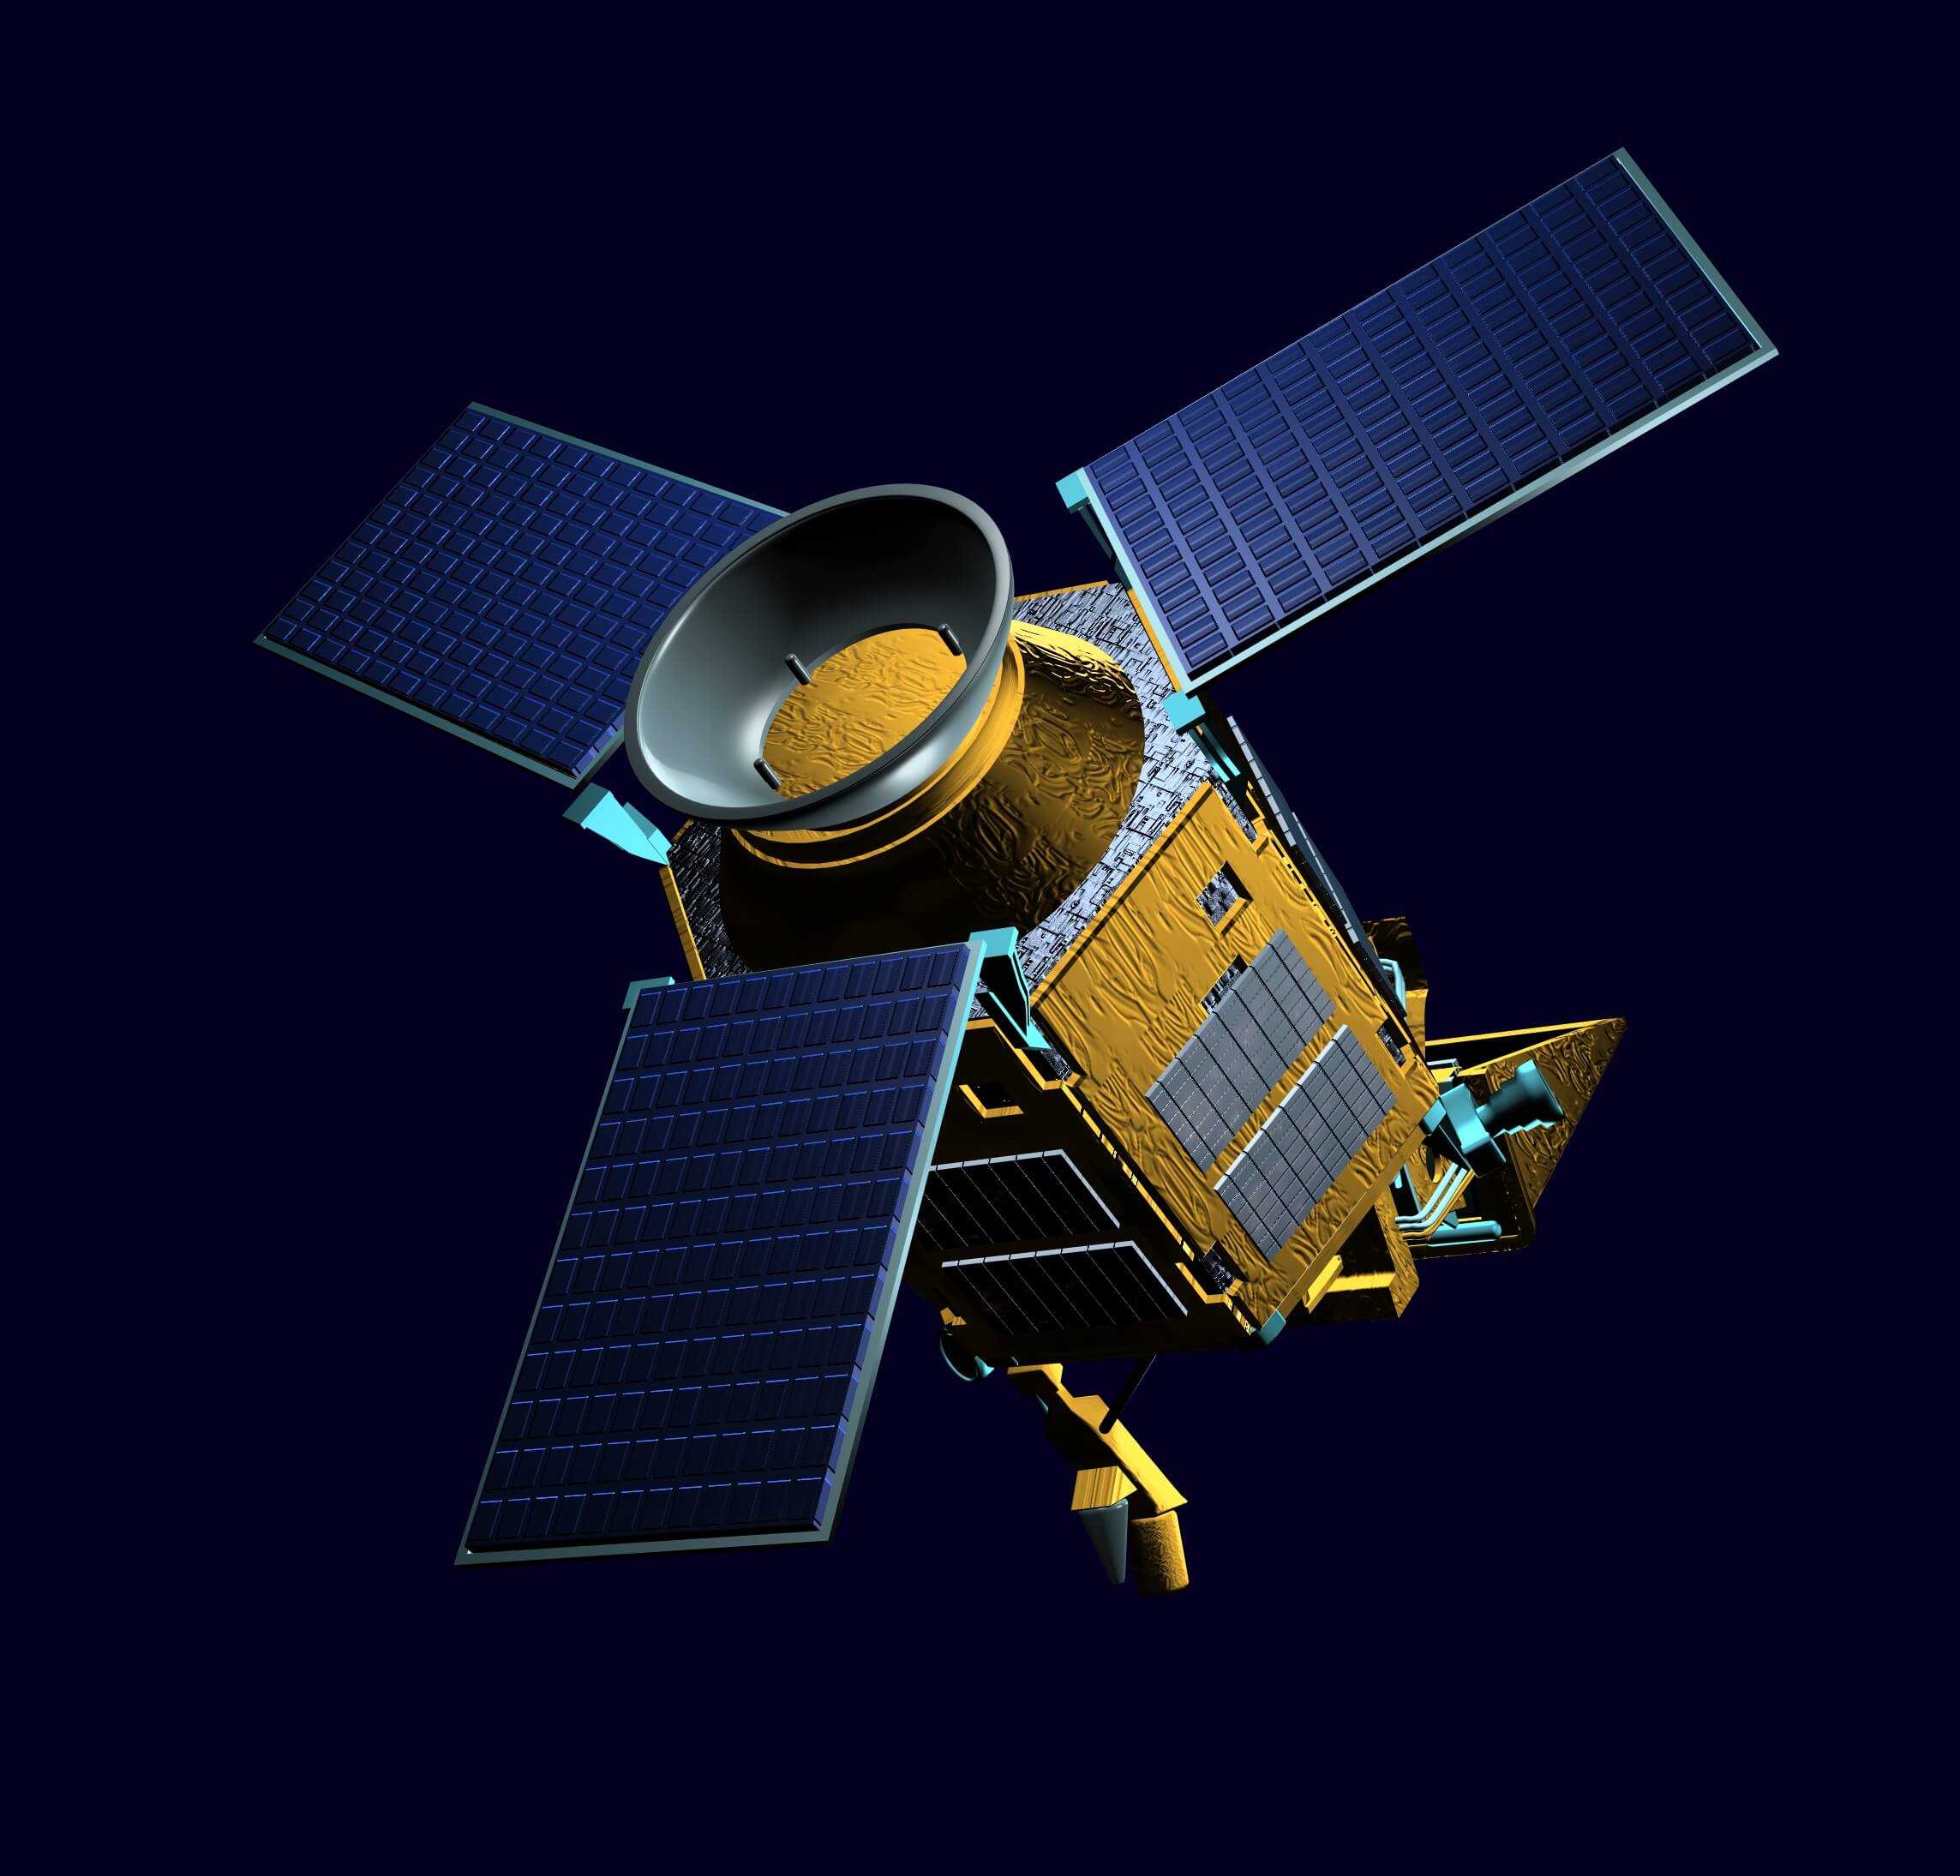 European satellite with Dutch space instrument Tropomi ready for launch